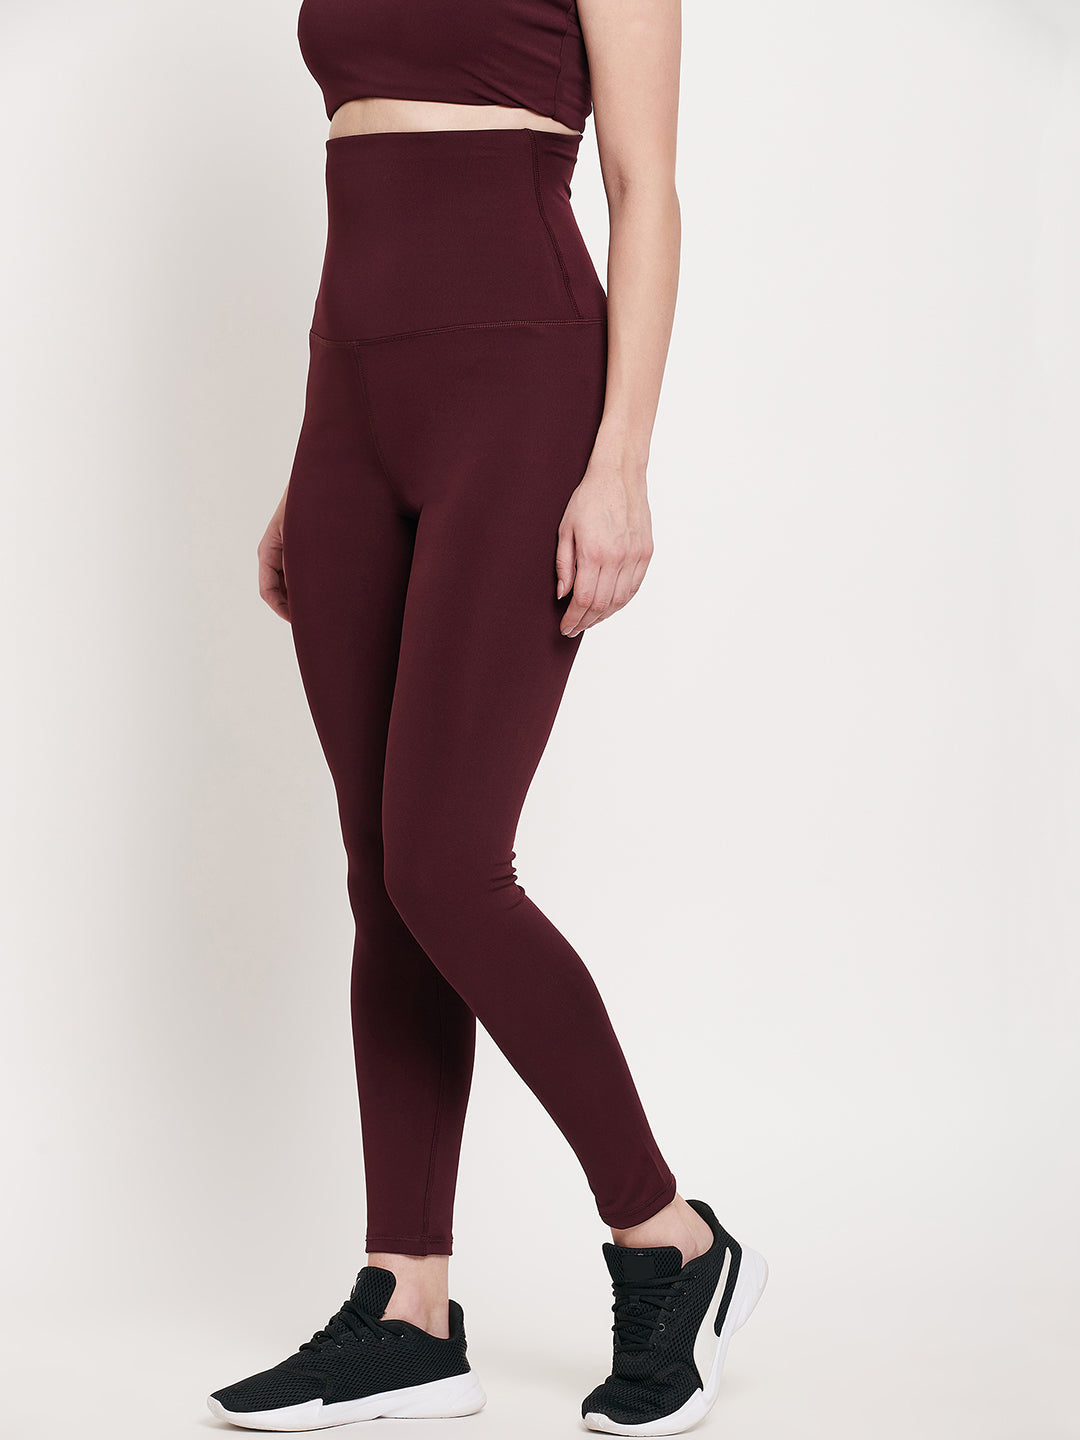 Women Belly Compression Wine color -Dry Antimicrobial legging